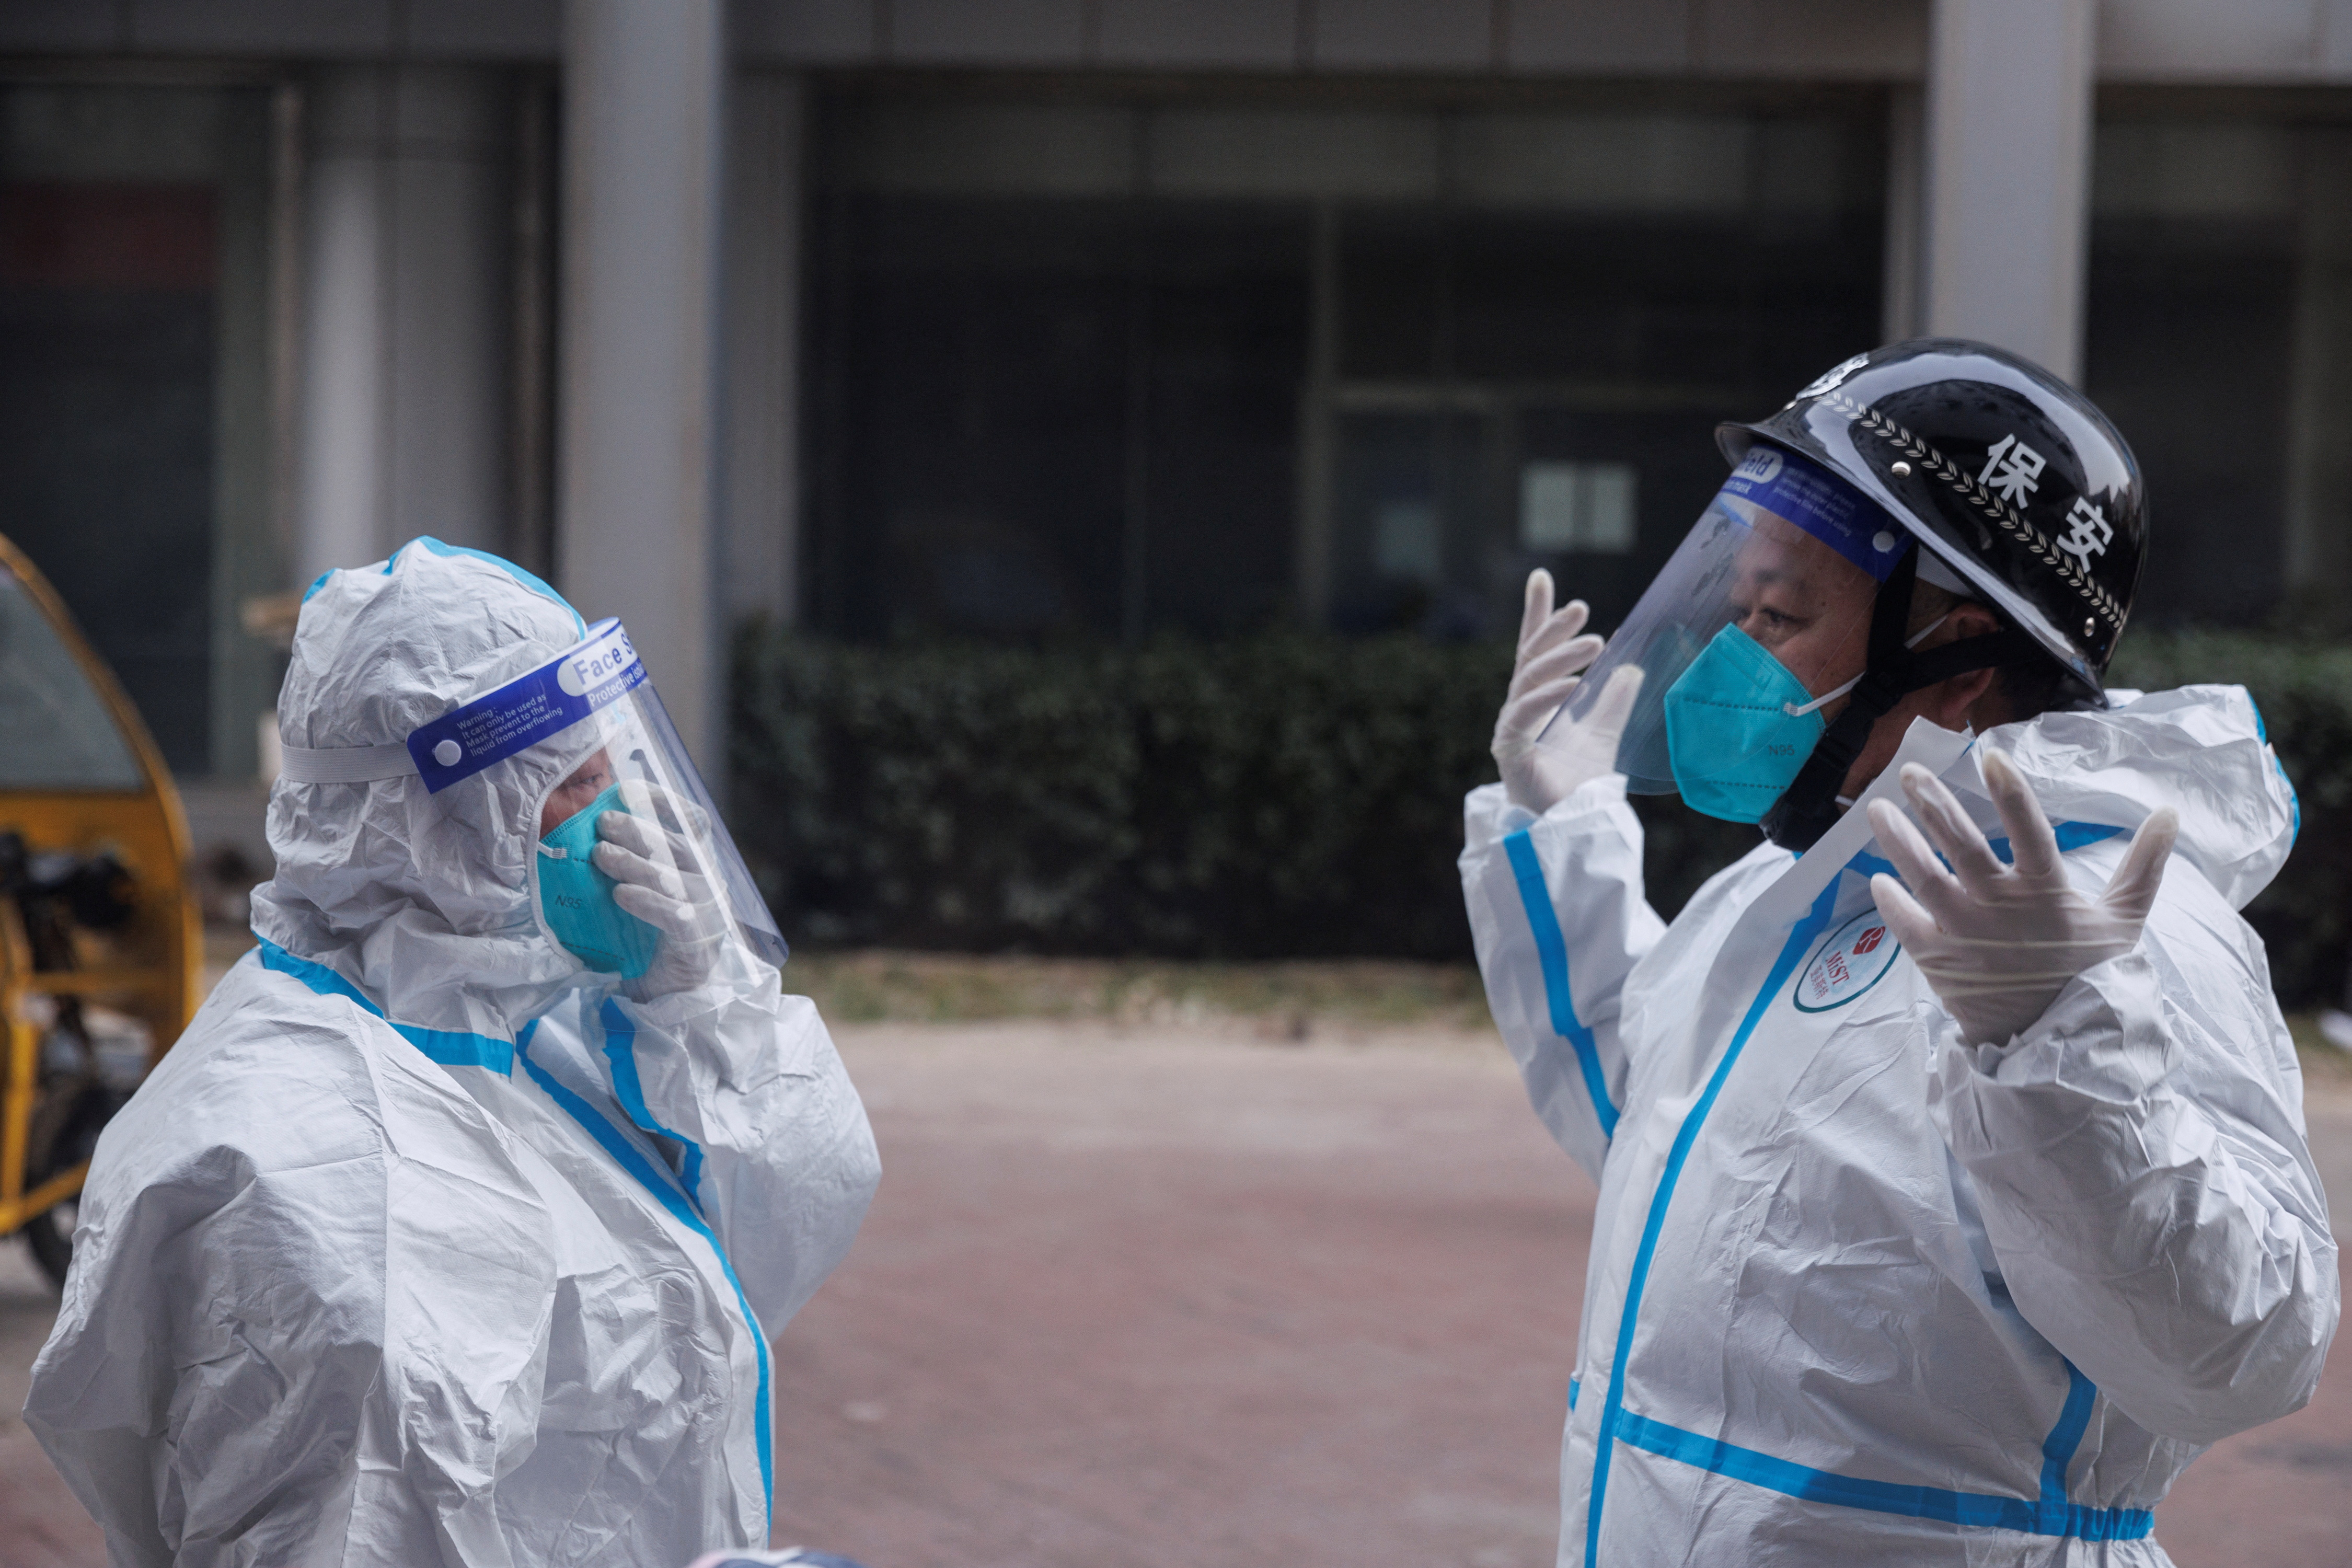 Pandemic prevention workers in protective suits get ready to enter an apartment building that went into lockdown as coronavirus disease (COVID-19) outbreaks continue in Beijing